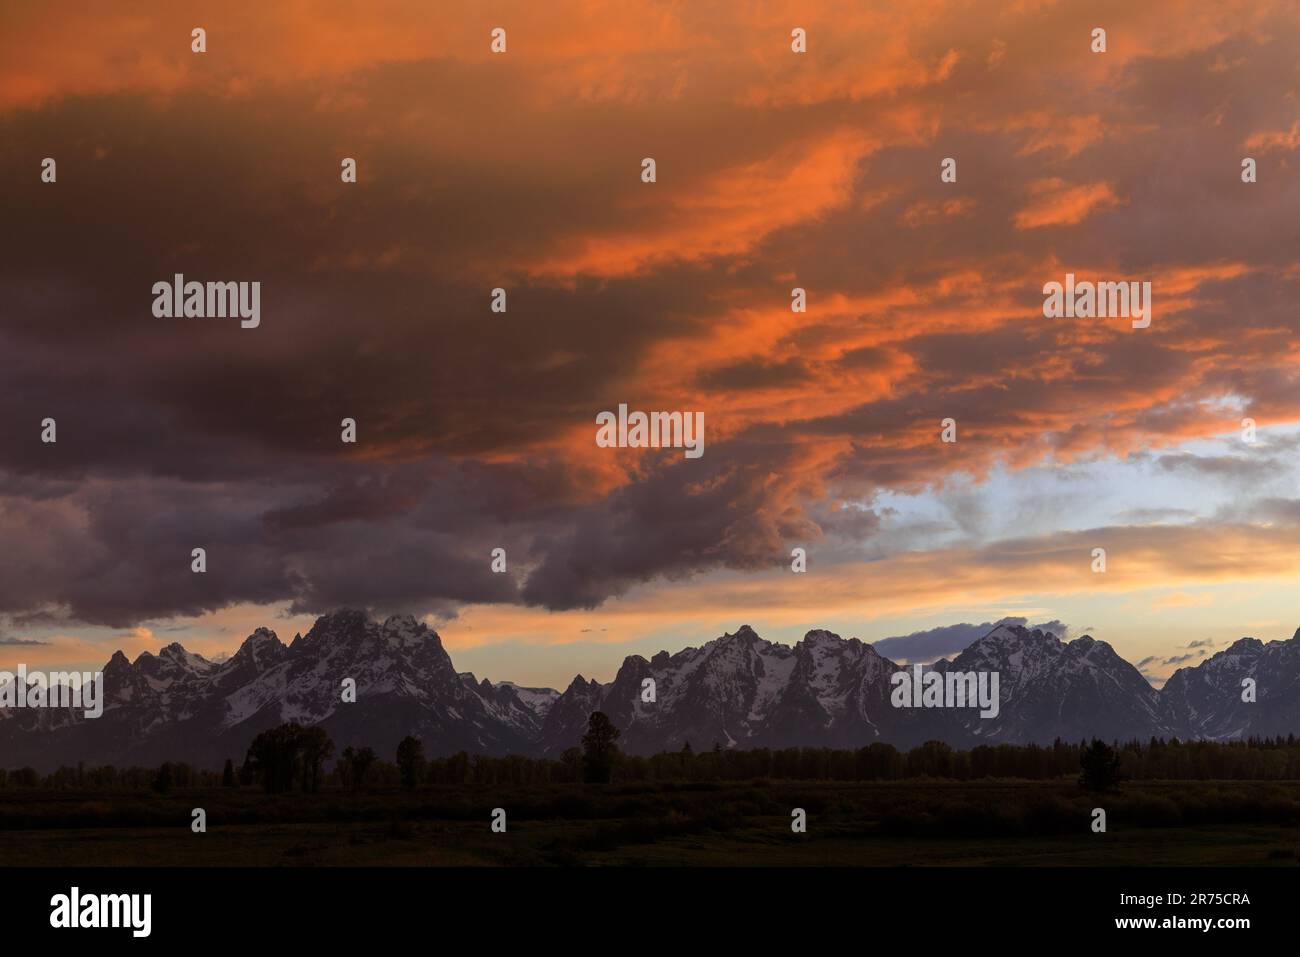 The setting sun lights up the clouds over Grand Teton National Park, Teton County, Wyoming, USA. The Teton Range is in the distance. Stock Photo